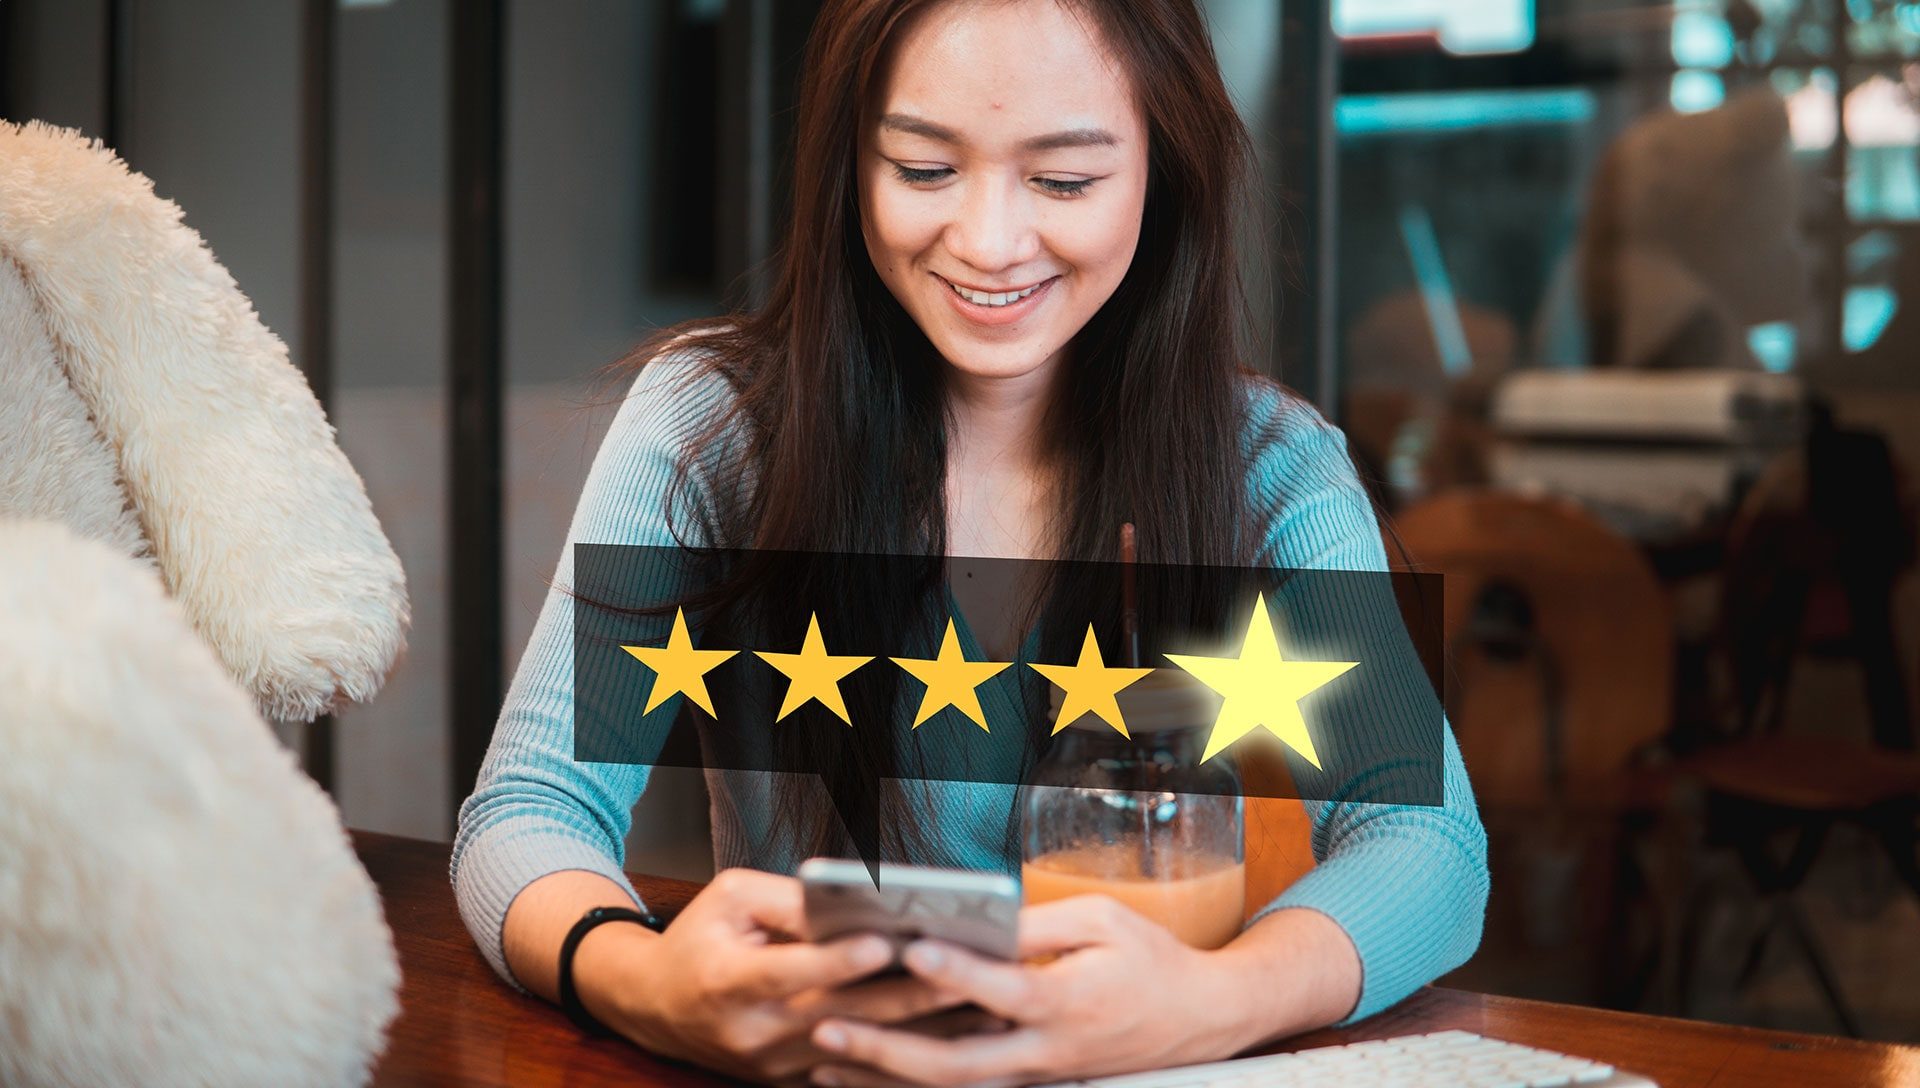 Female looking at phone giving 5 star review